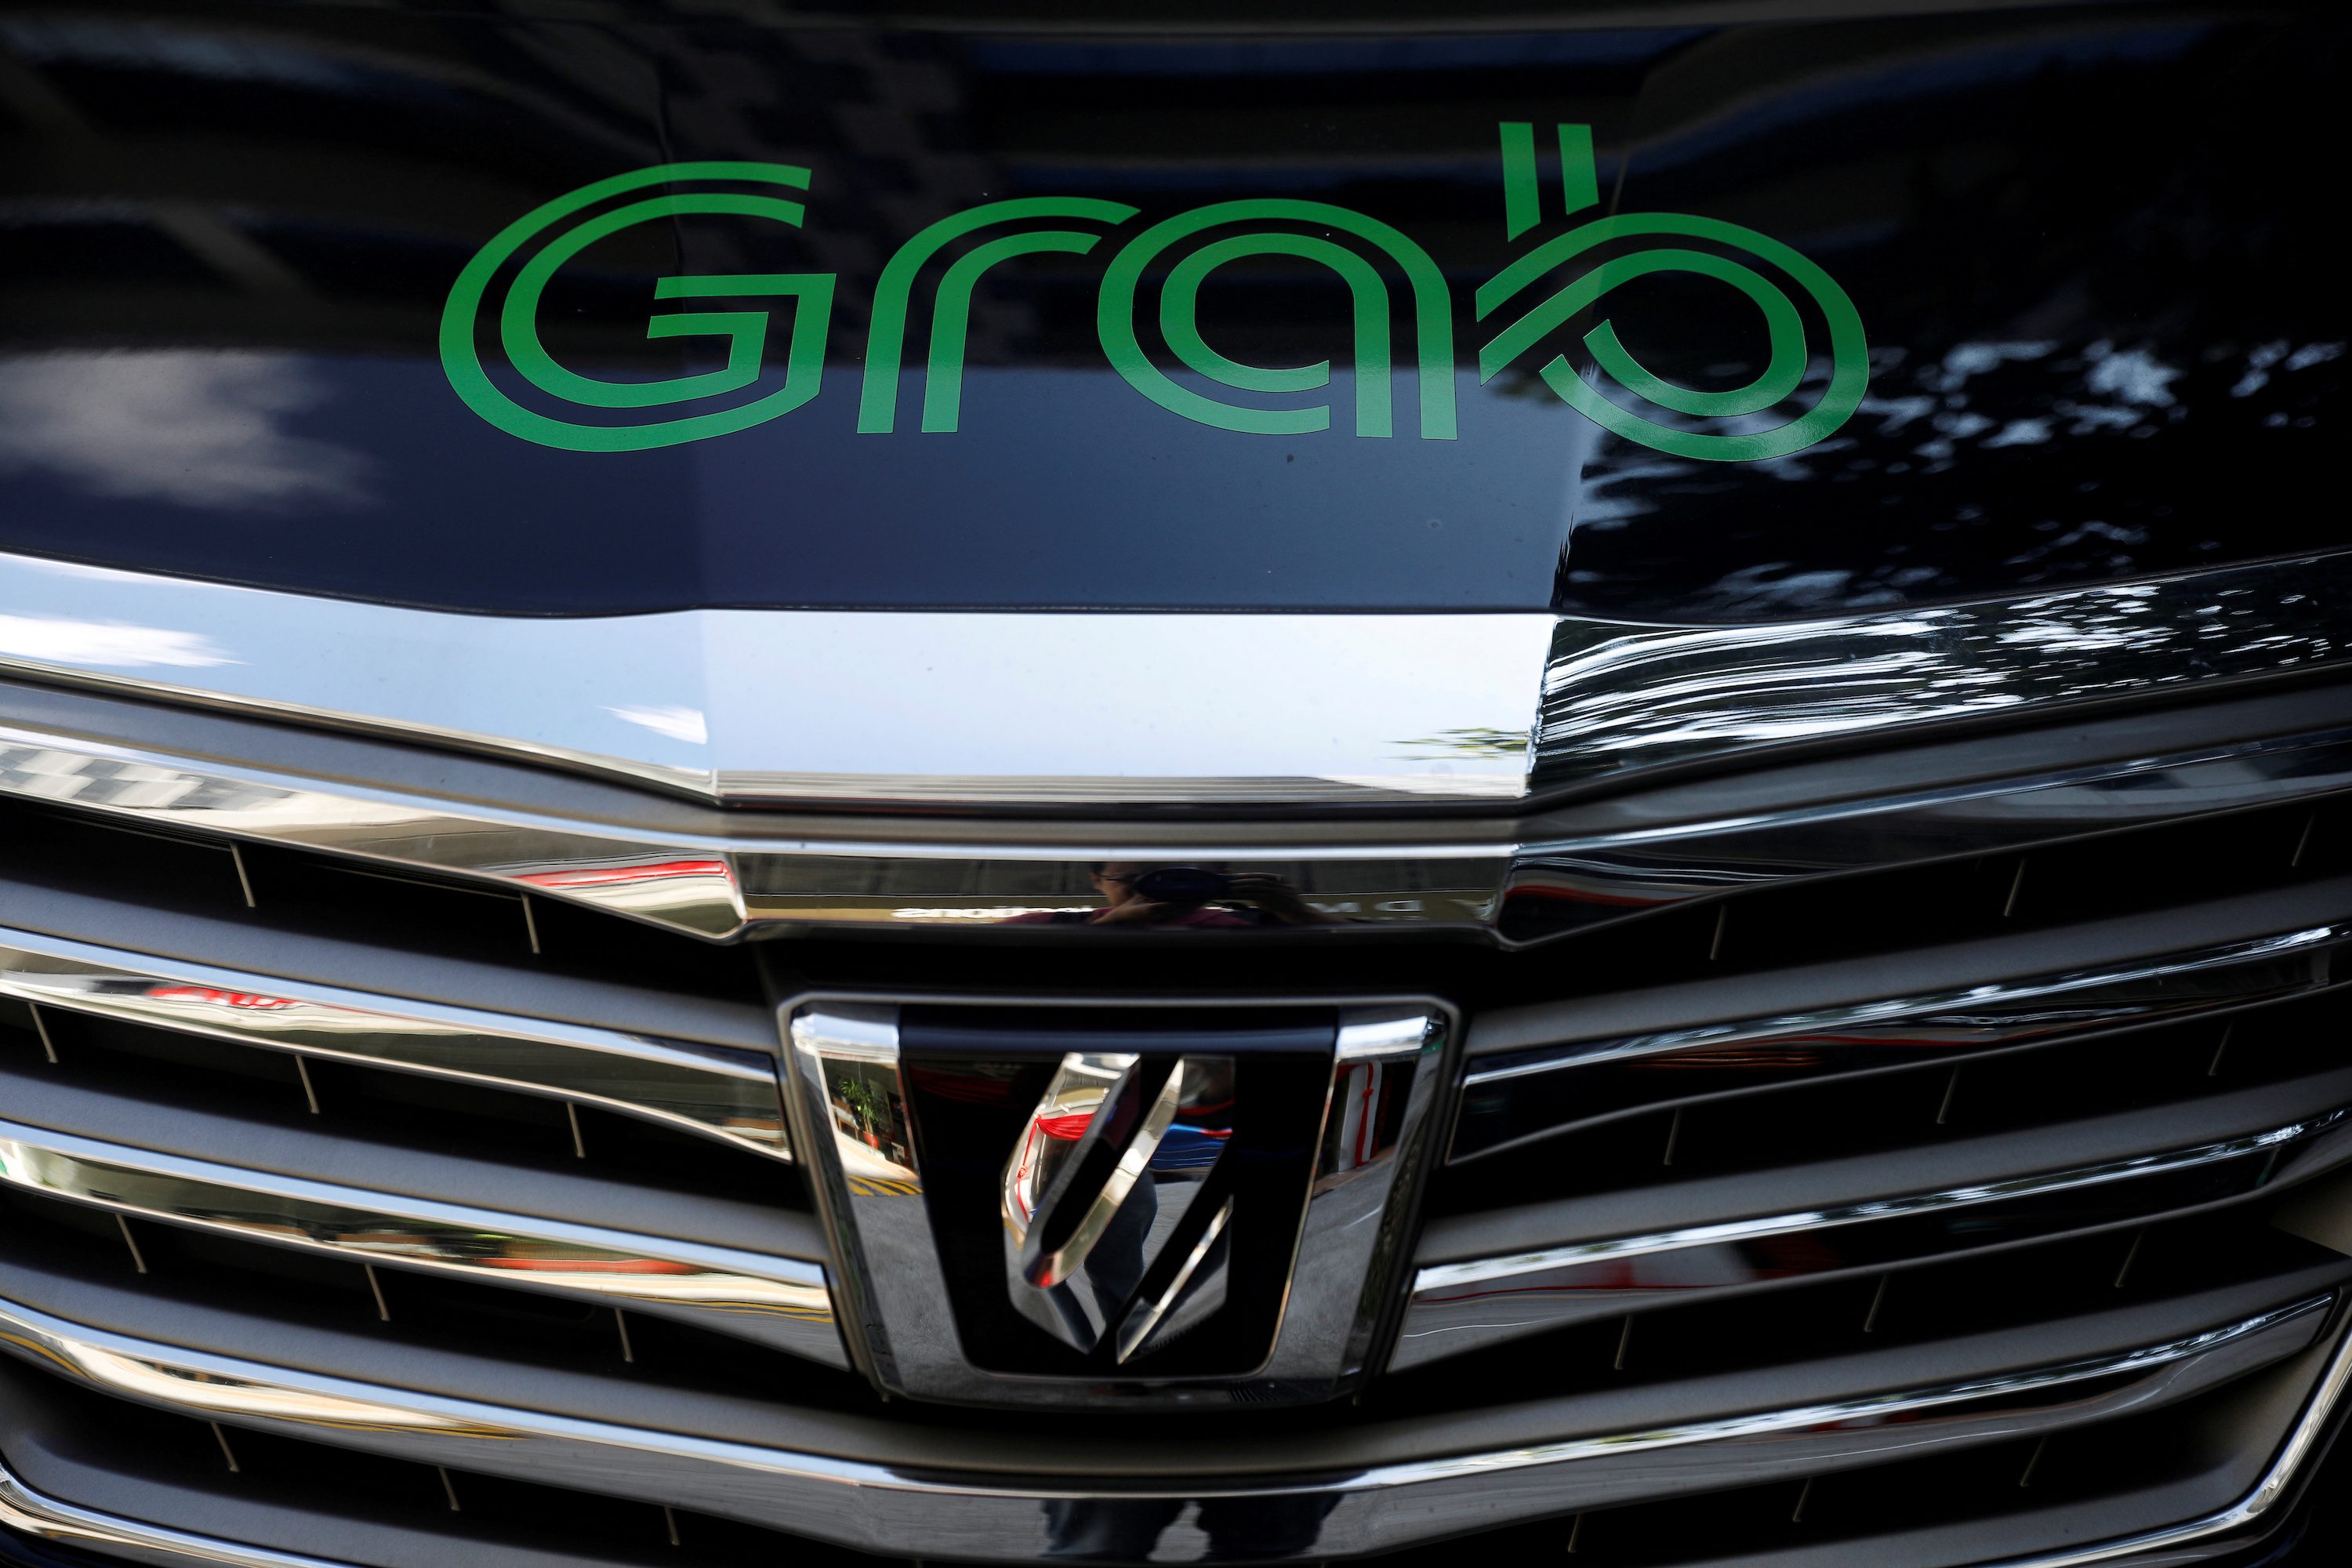 Grab agrees to world’s biggest SPAC merger, valued at $40 billion